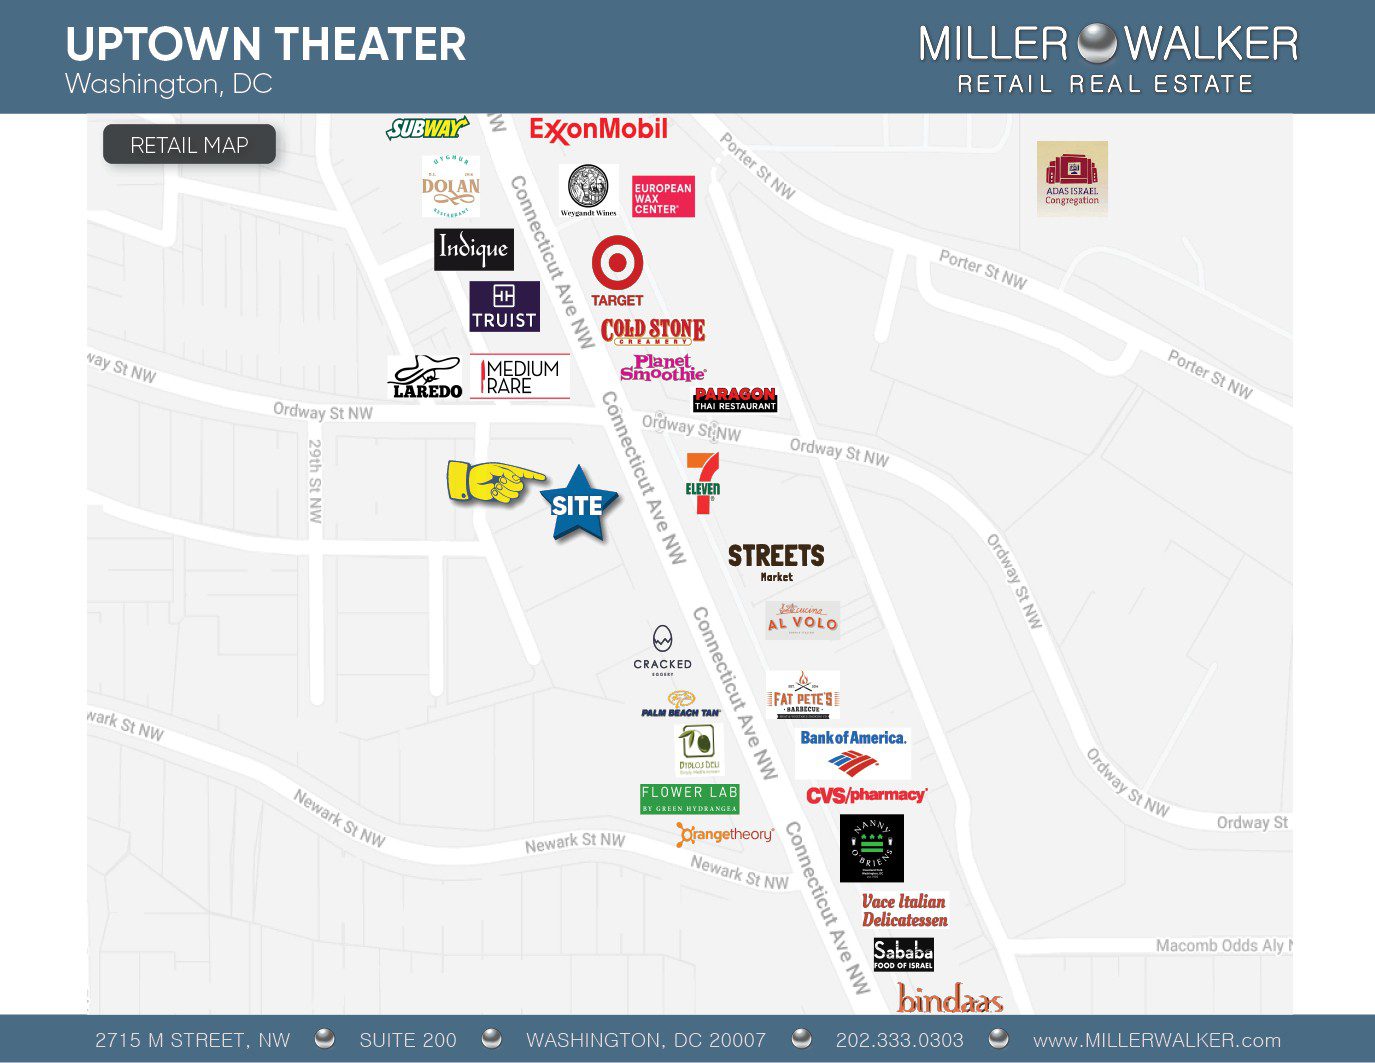 commercial real estate DC - uptown theater Woodley park - nearby area retail map